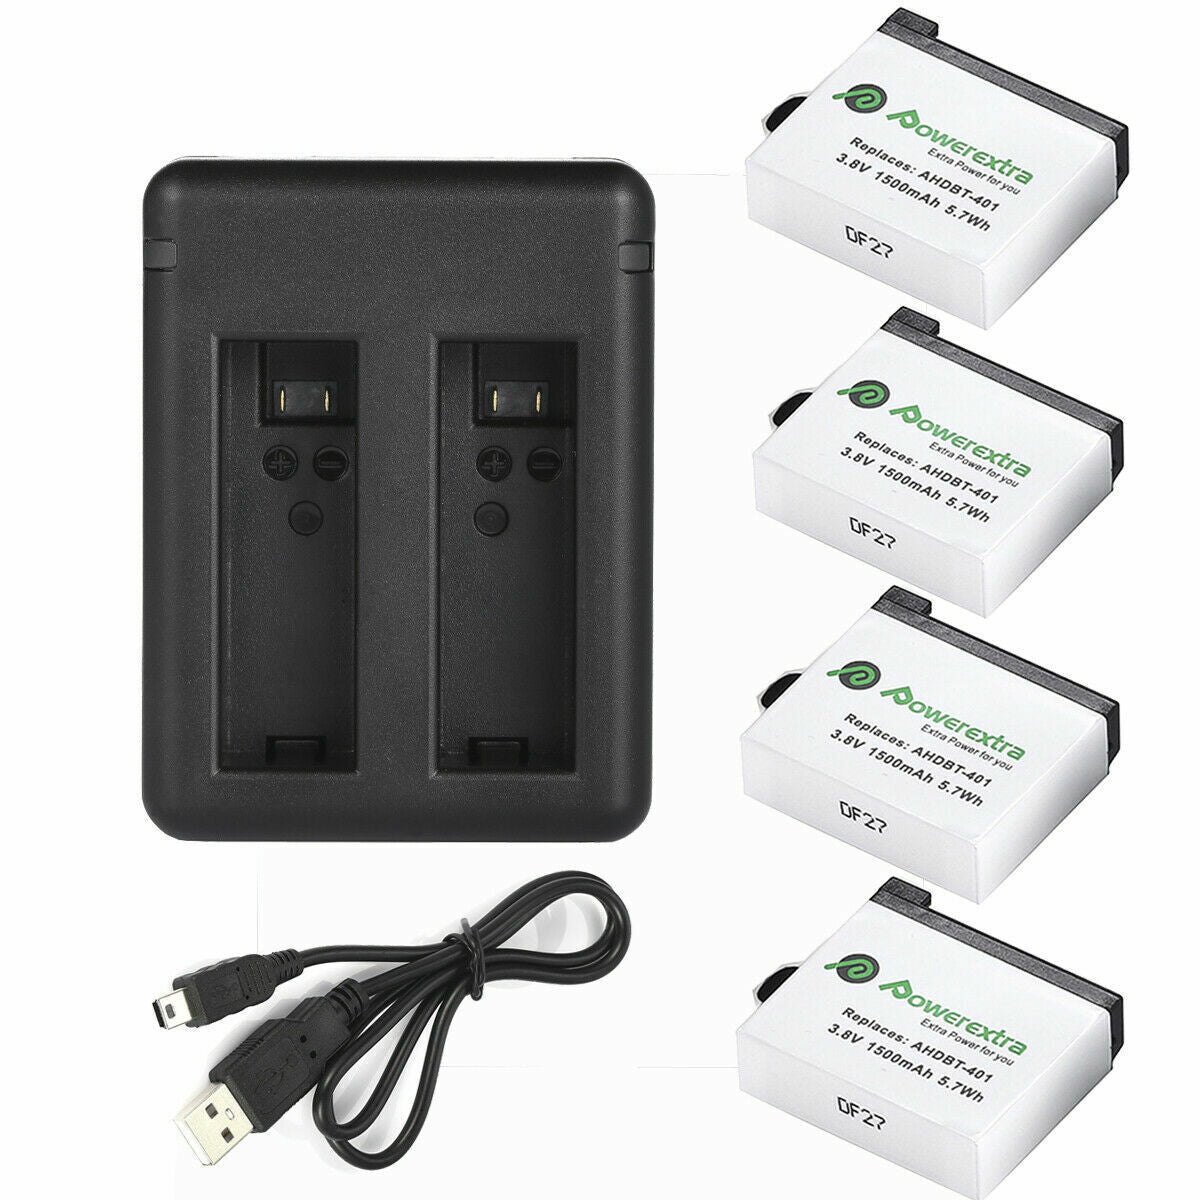 1500mAh AHDBT-401 Battery and Dual Charger For GoPro AHDT401 AHDBT-401